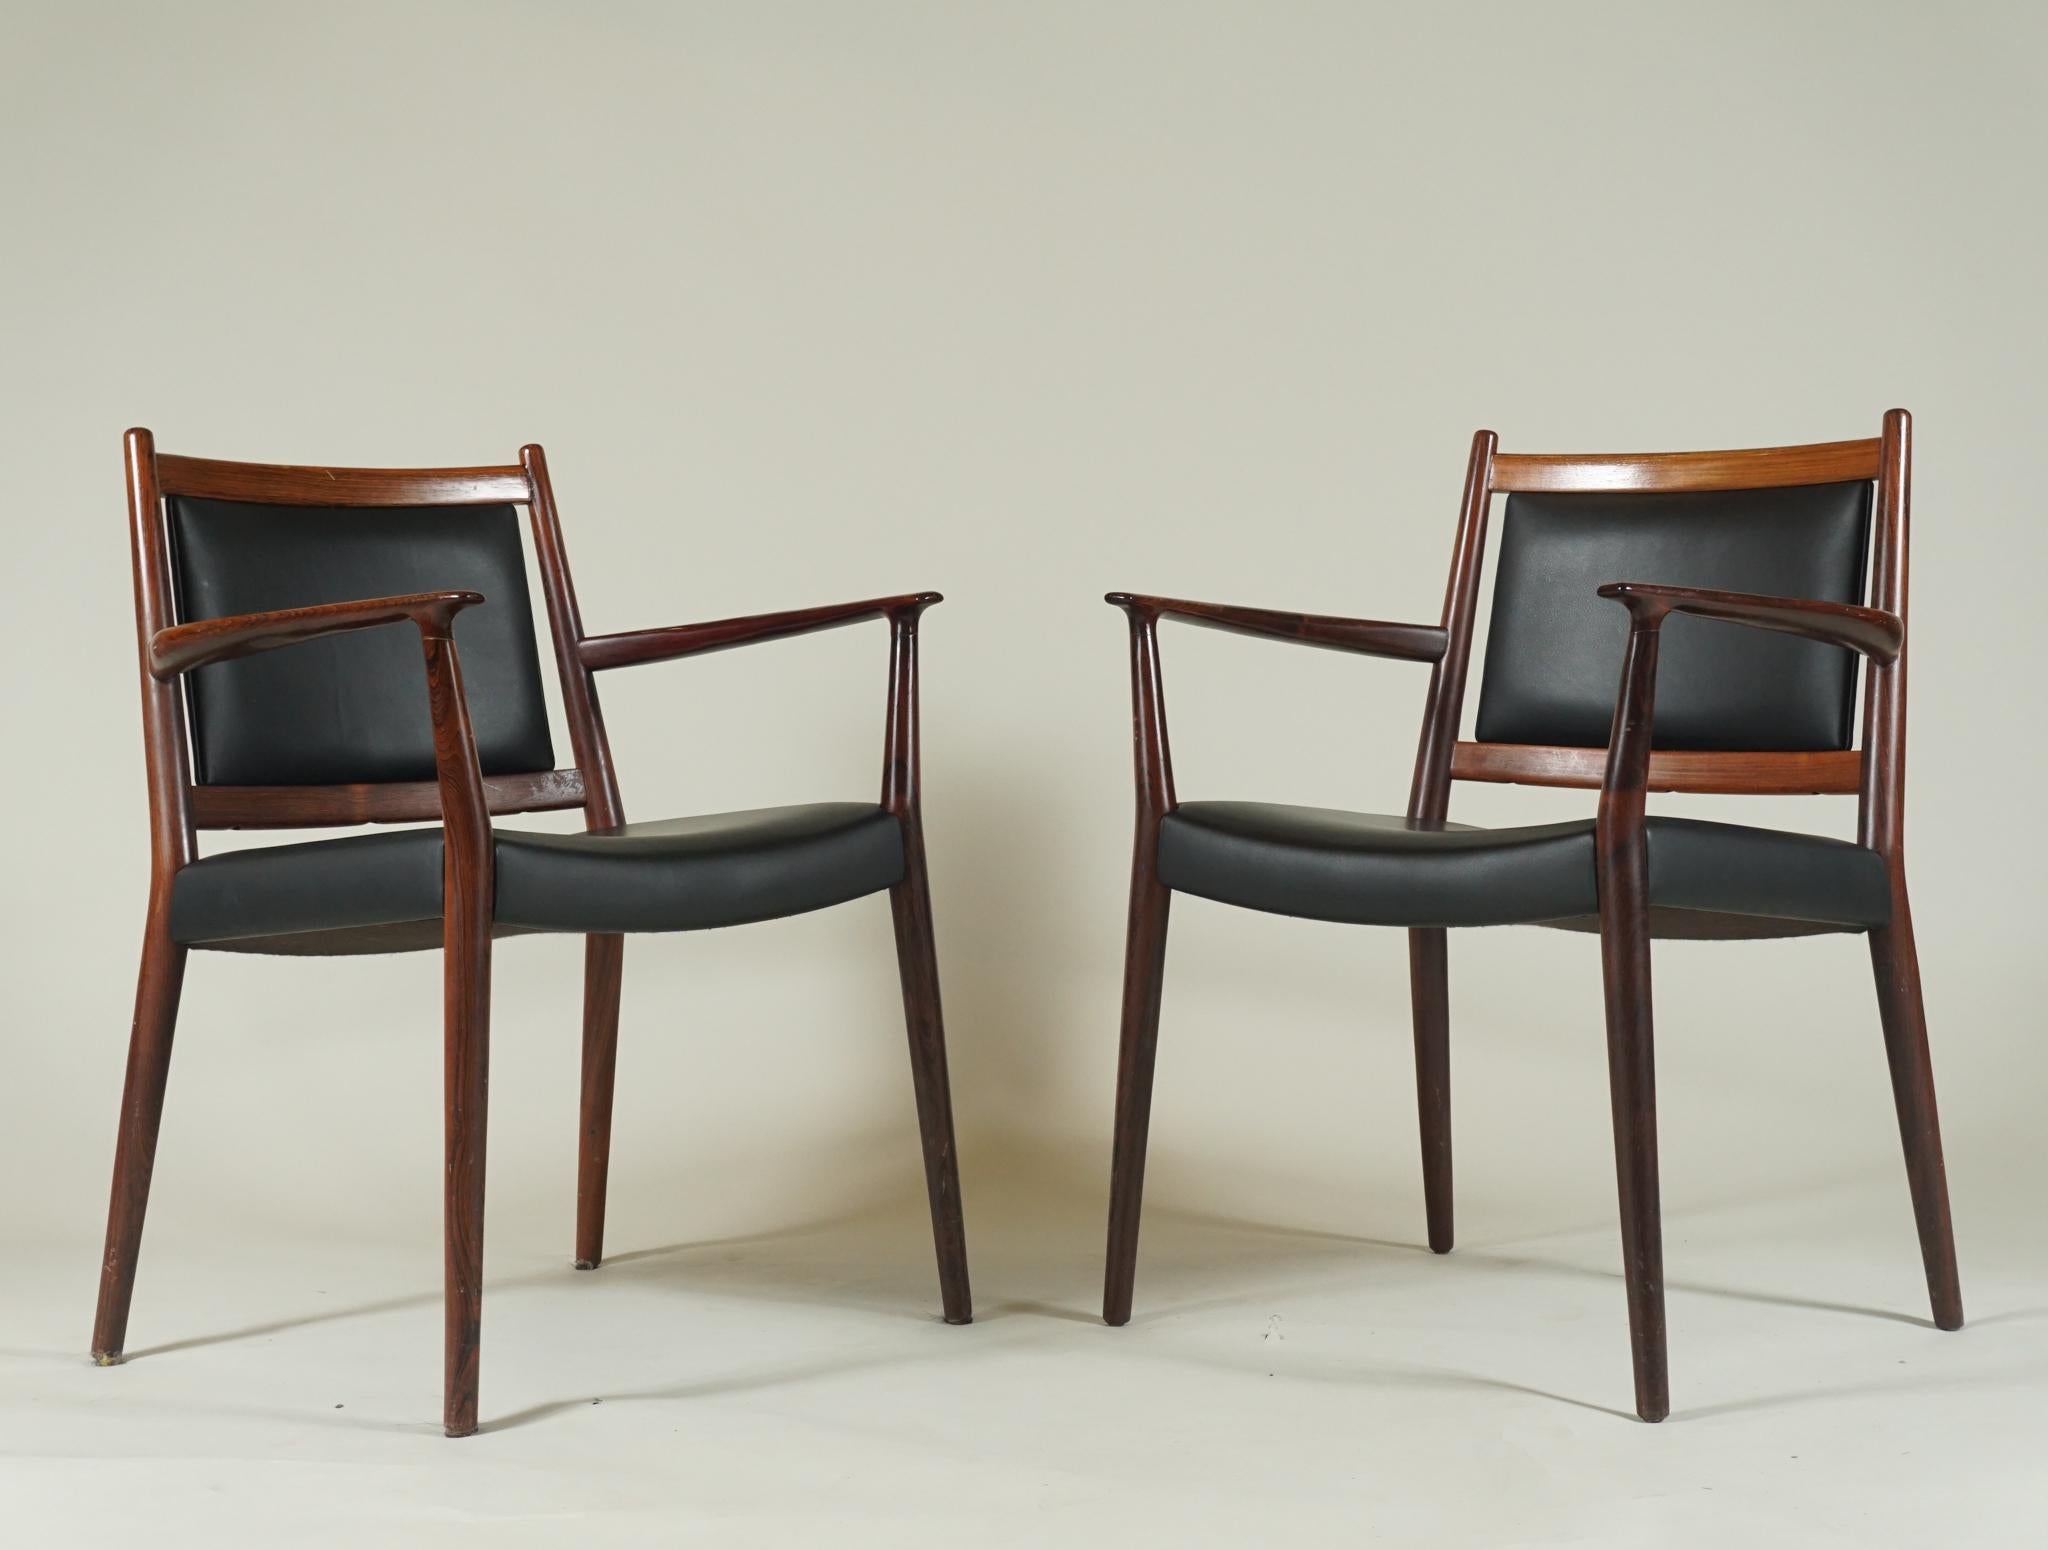 A handsome pair of rosewood armchairs, upholstered in black leather by Danish architect, Steffan Syrach
Larsen, Danish modern, very high quality. Polished rosewood and fine quality black leather. Perfect as
desk chairs or occasional armchairs.